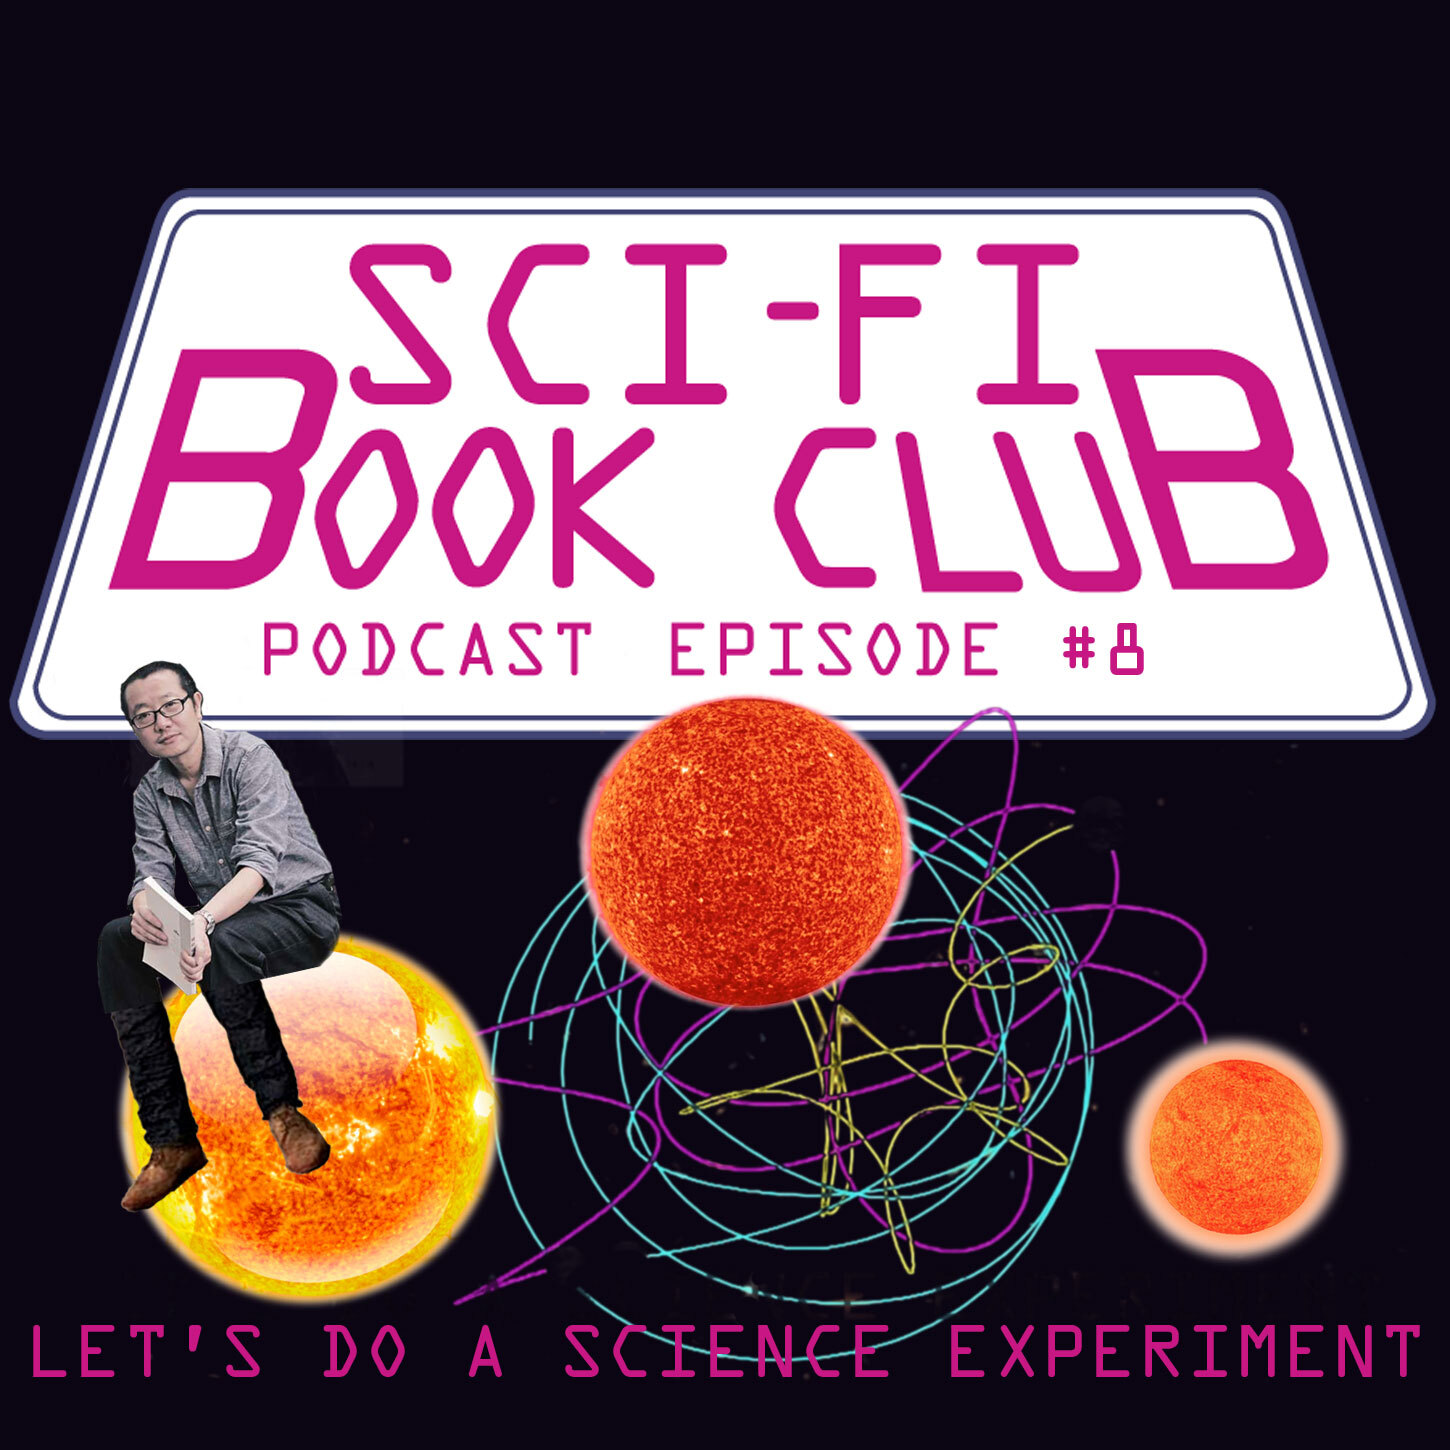 Sci-Fi Book Club Podcast #8: Let’s Do A Science Experiment